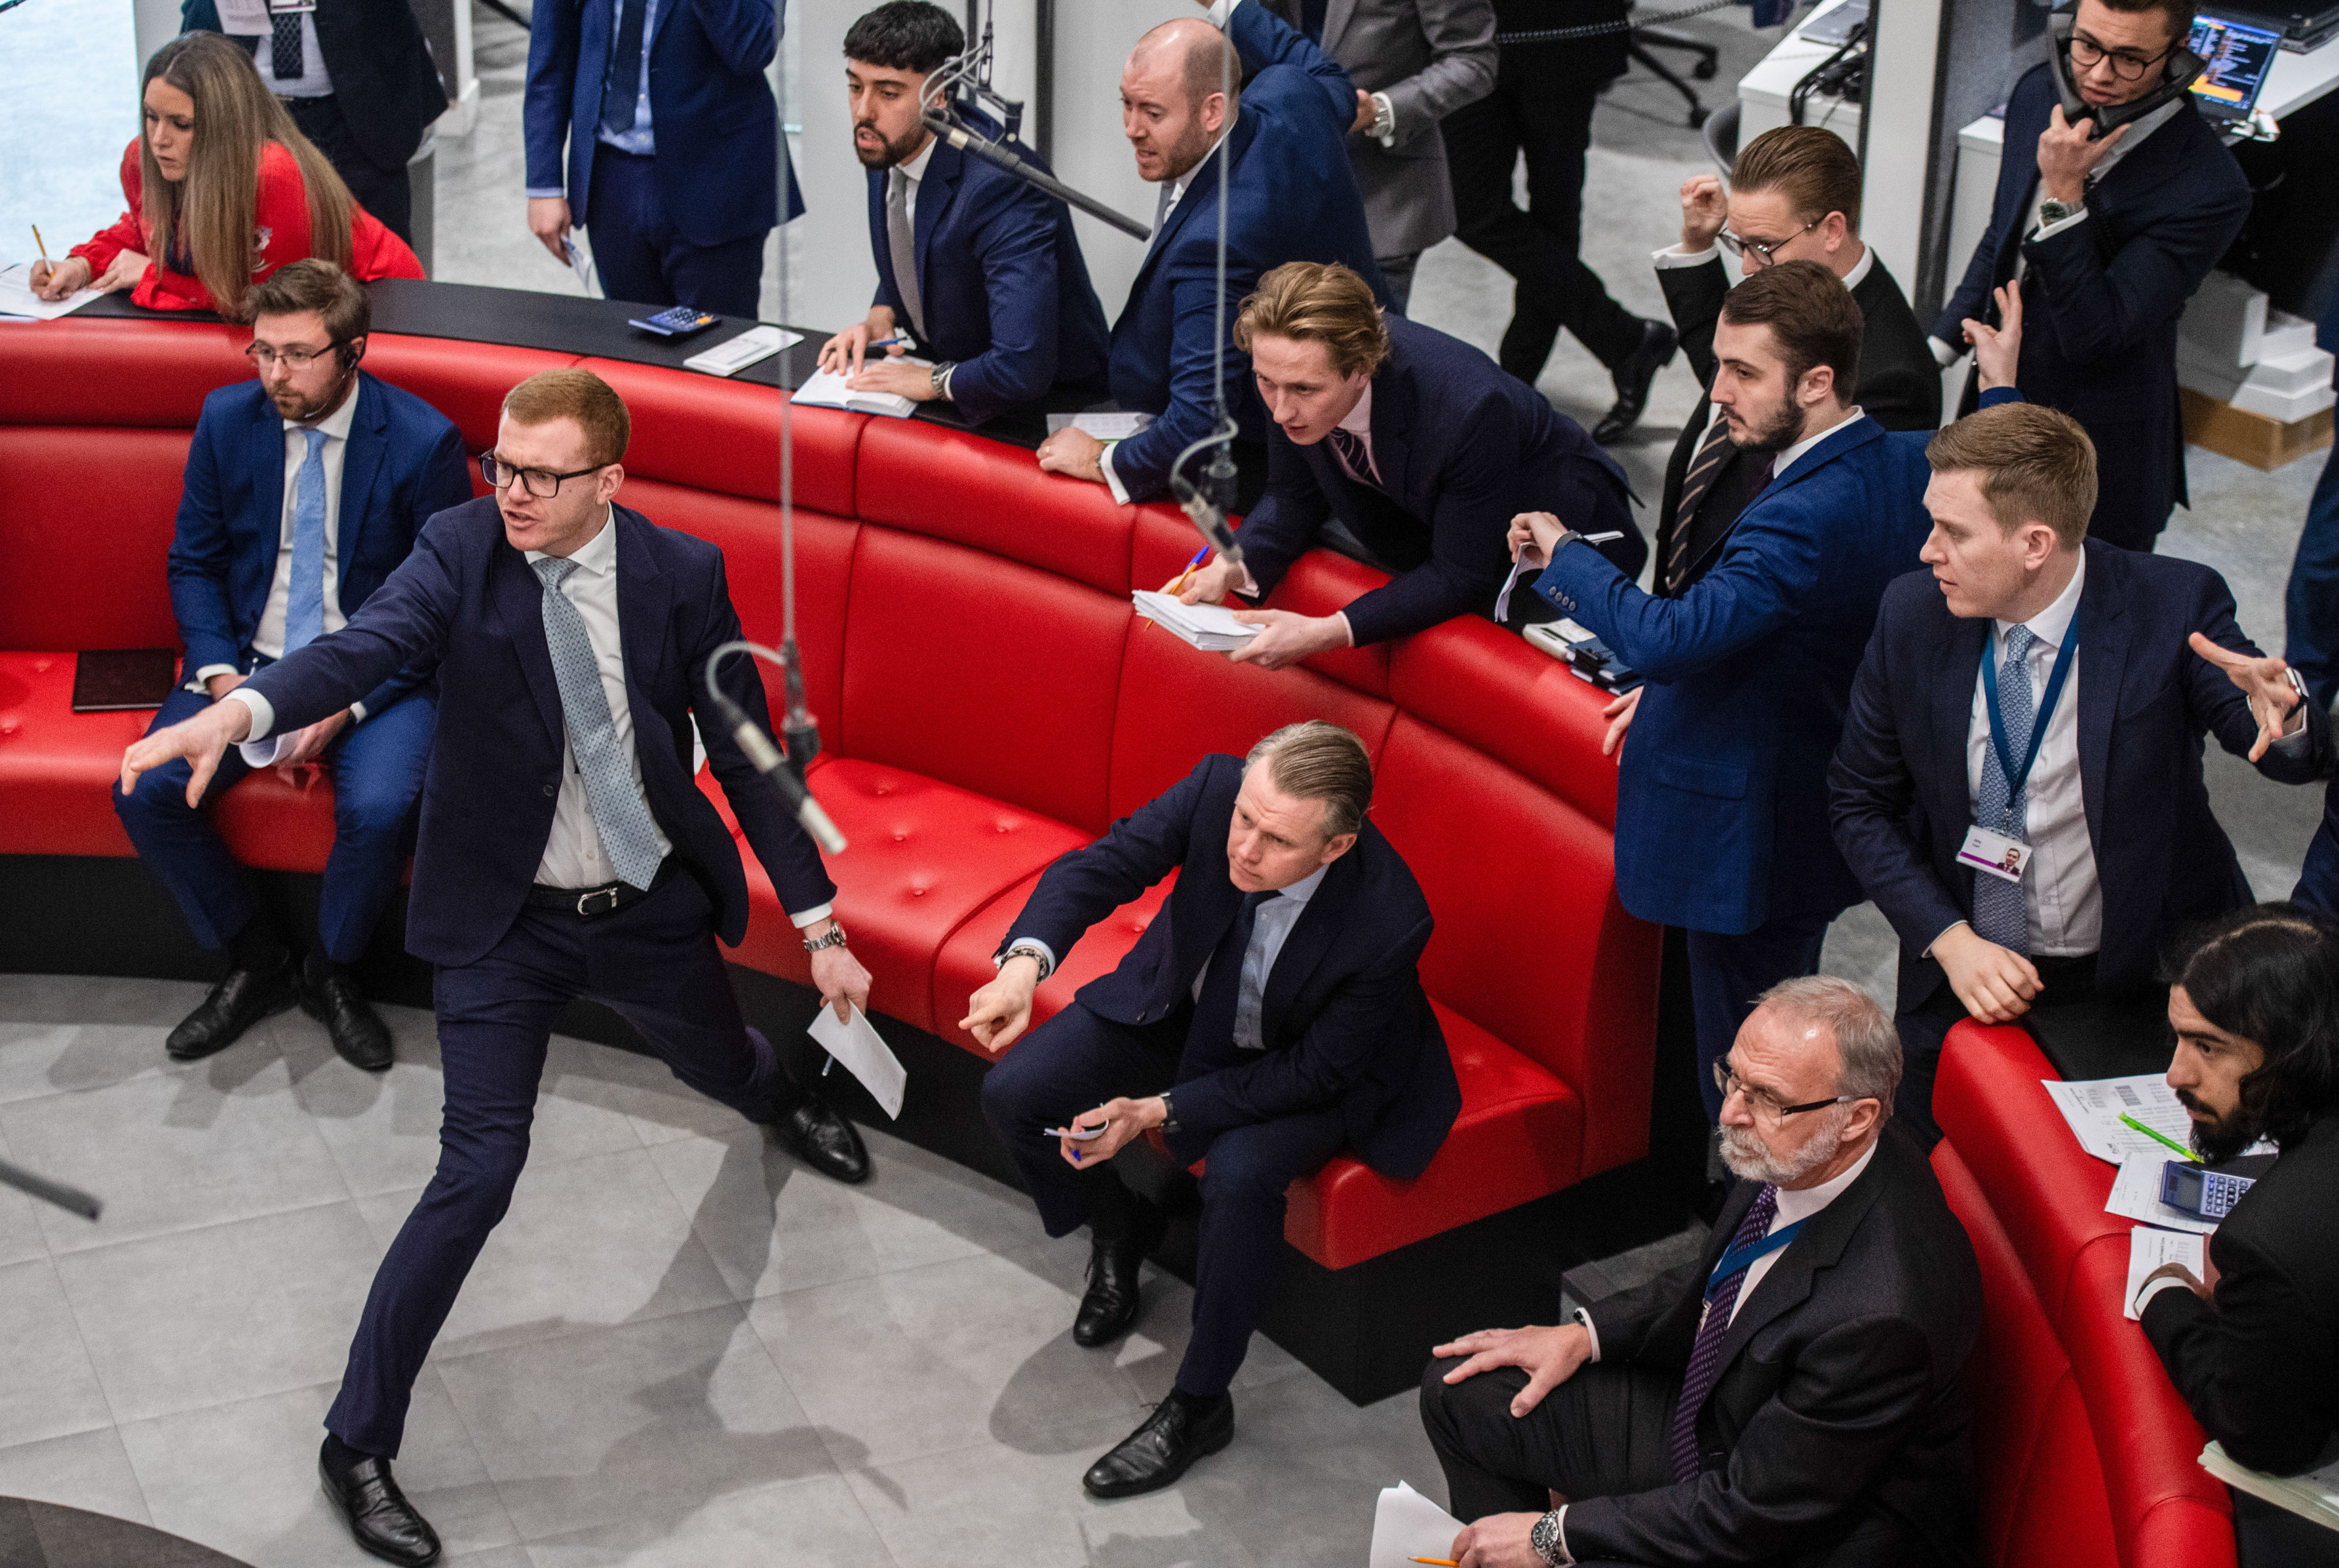 Traders, brokers and clerks operate on the trading floor of the open outcry pit at the London Metal Exchange in February 2022. Photo: Bloomberg